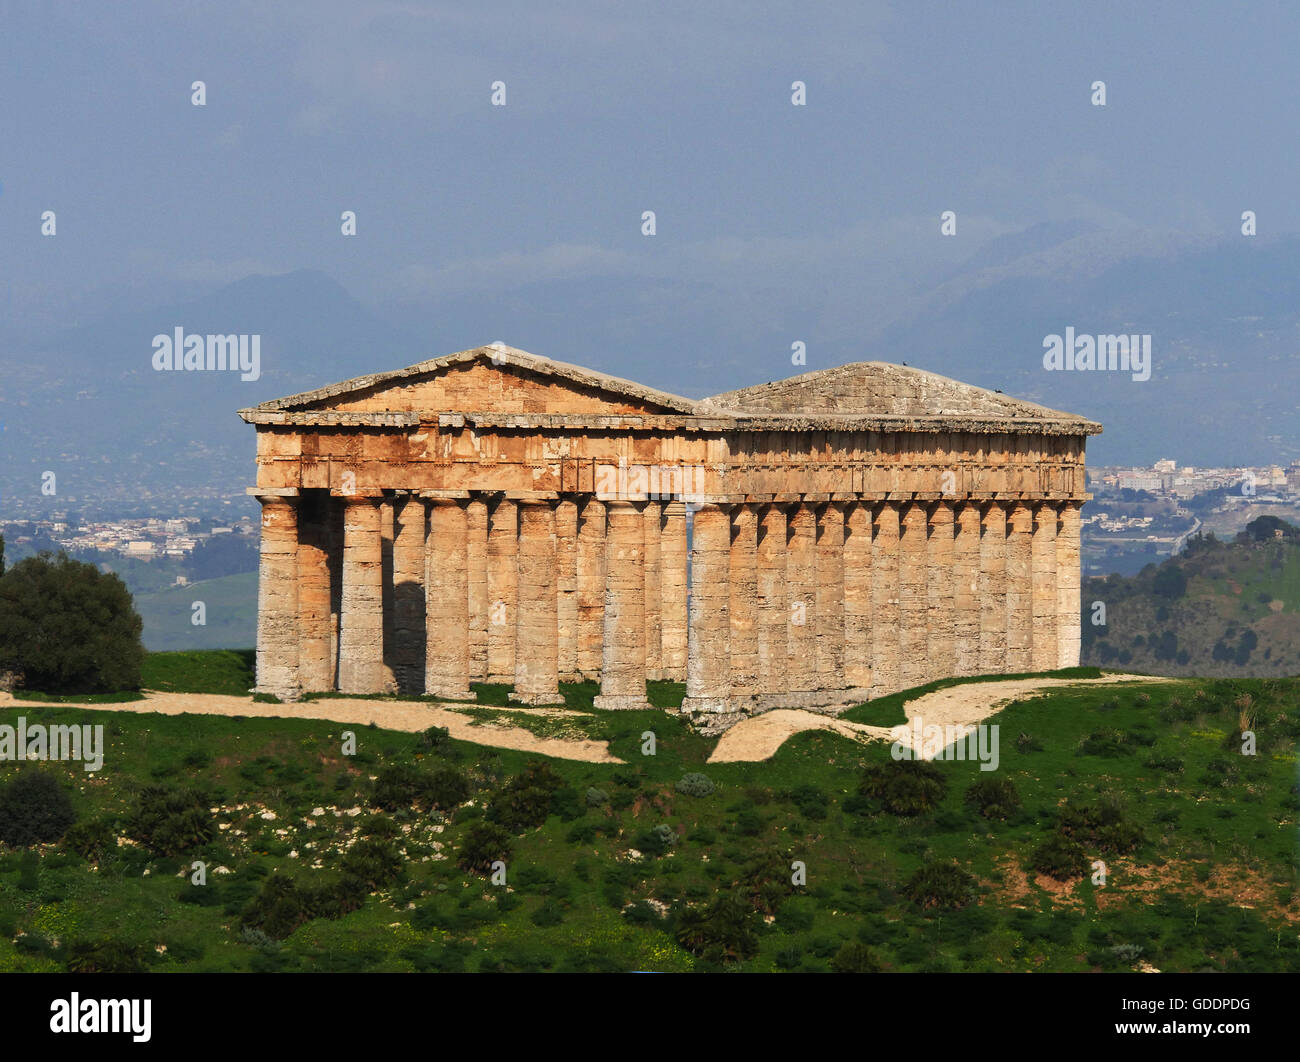 Ancient Greek Doric temple, Segesta, archaeological site, Sicily, Italy Stock Photo